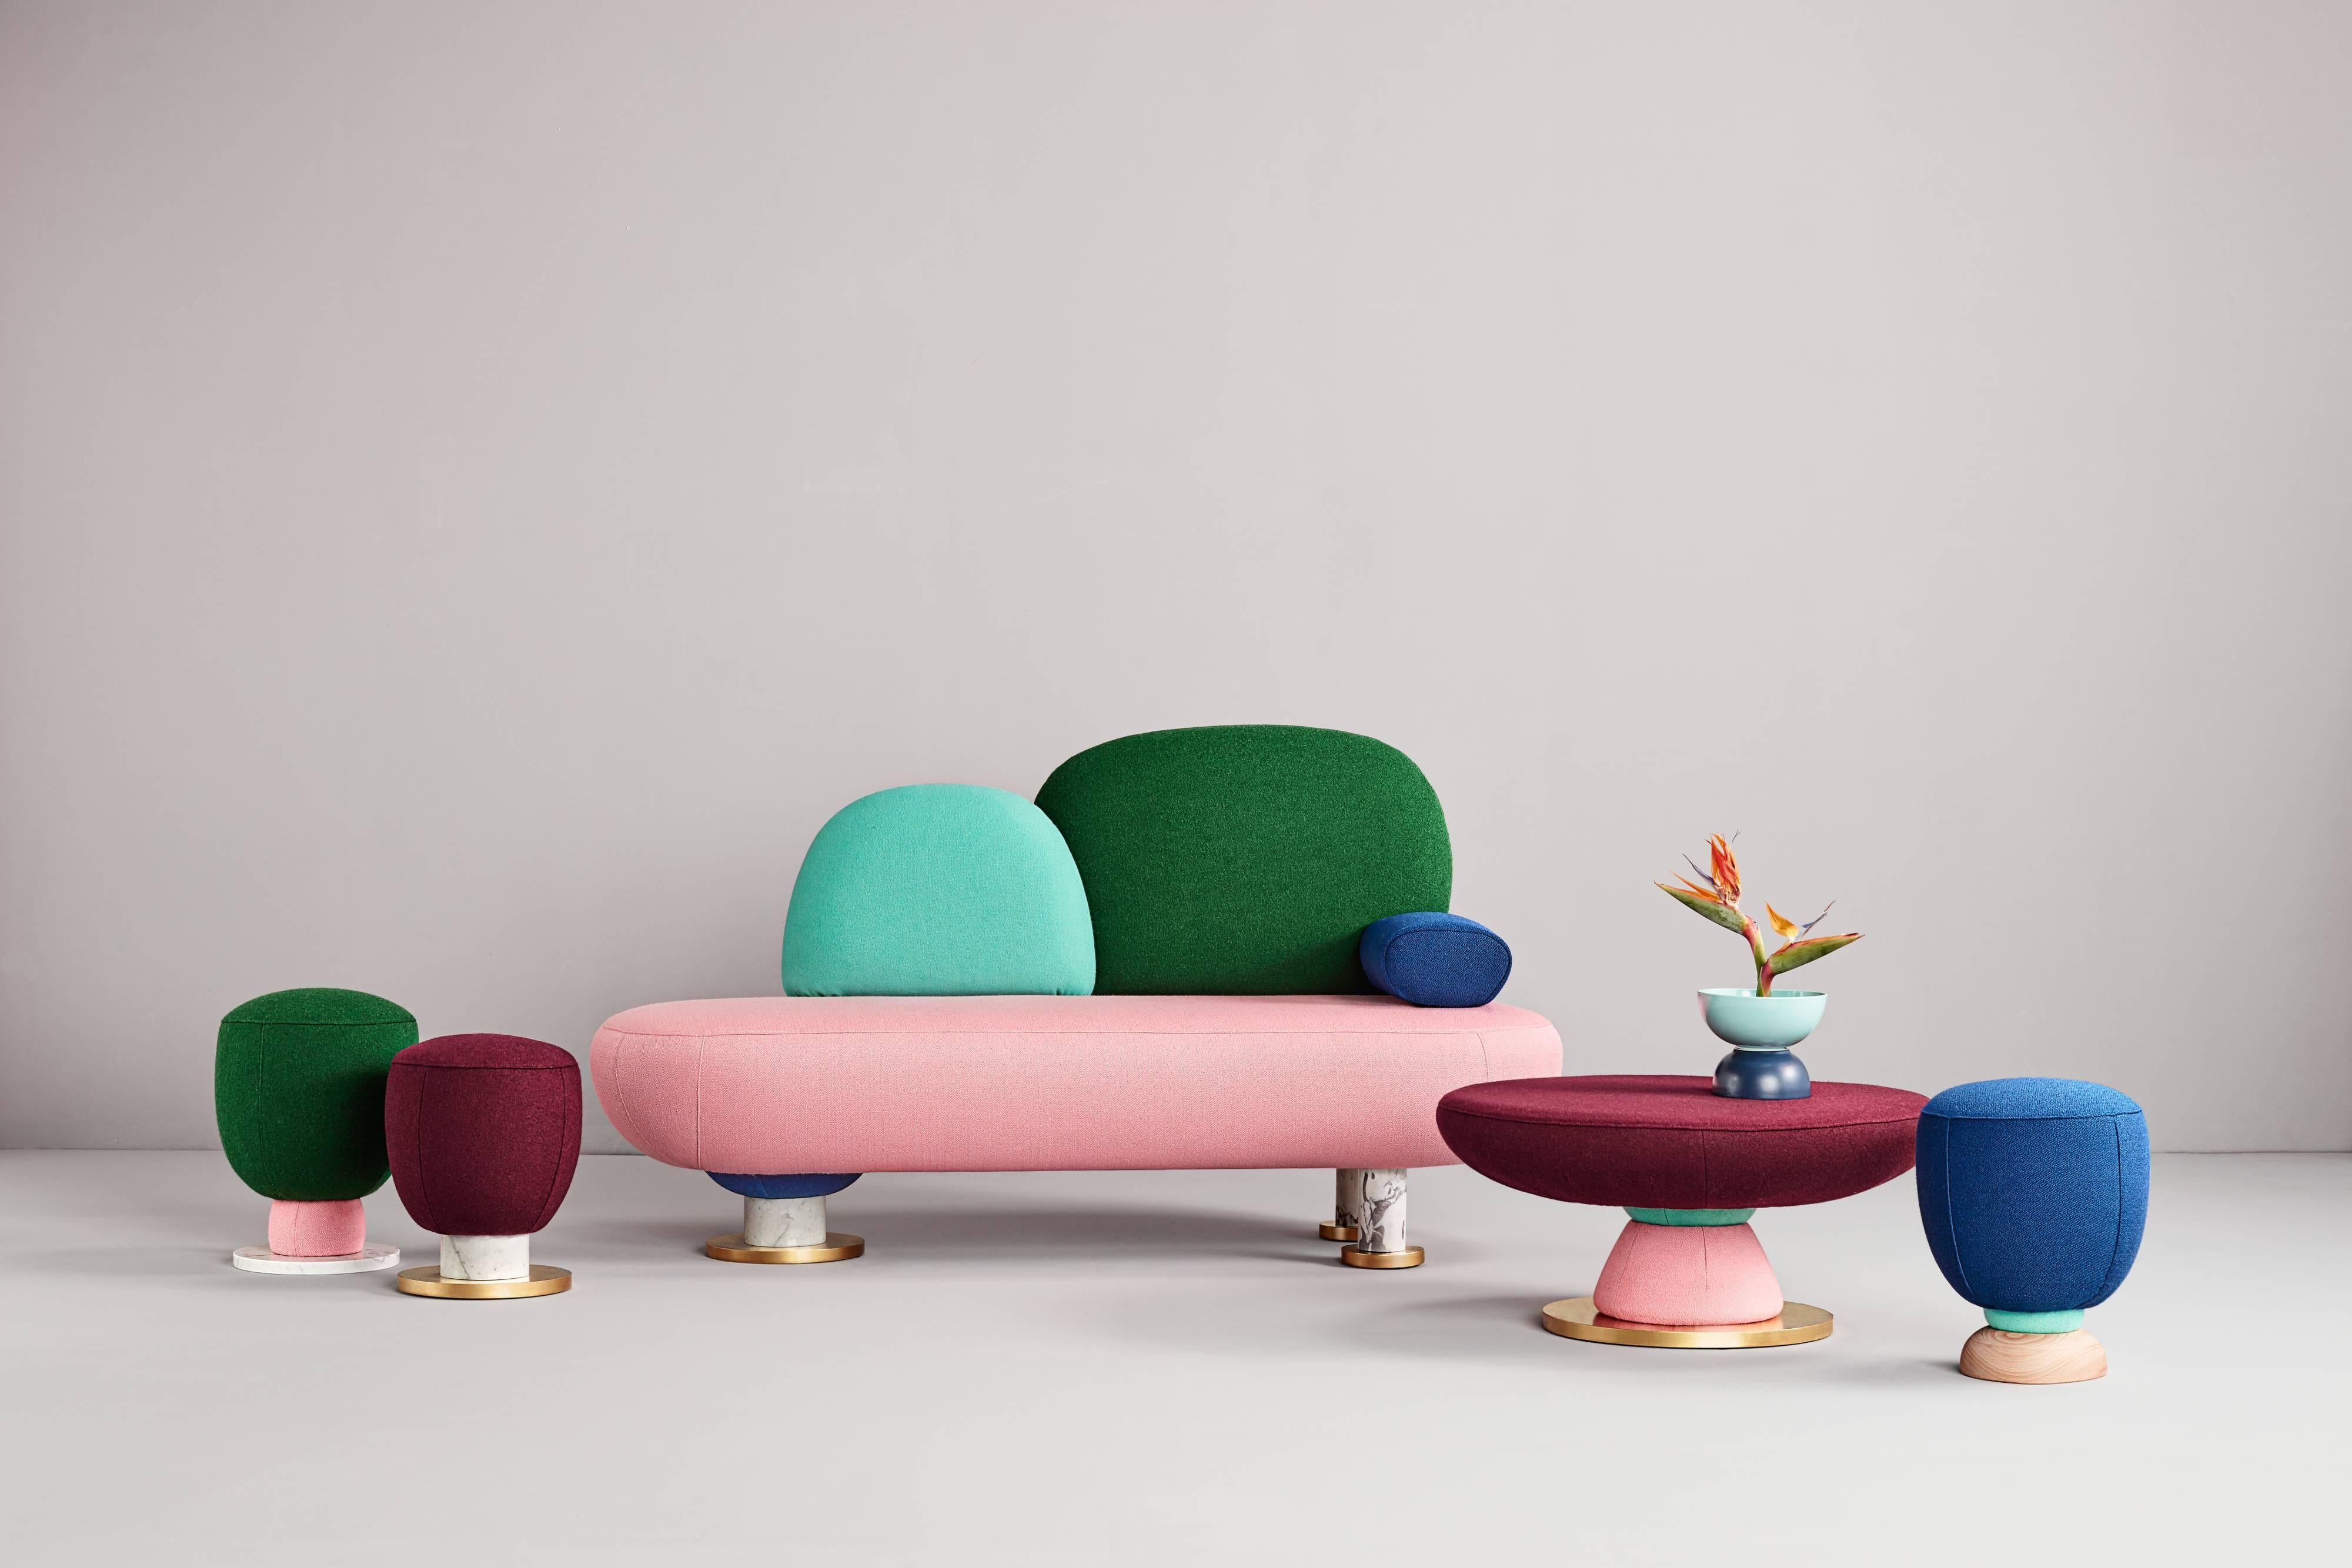 Toadstool collection ensemble sofa, table and puffs, Masquespacio

Made to order fabrics and colors can be chosen.

This collection of puffs, table and sofa bench designed by Masquespacio is inspired in the visual culture and graphic design